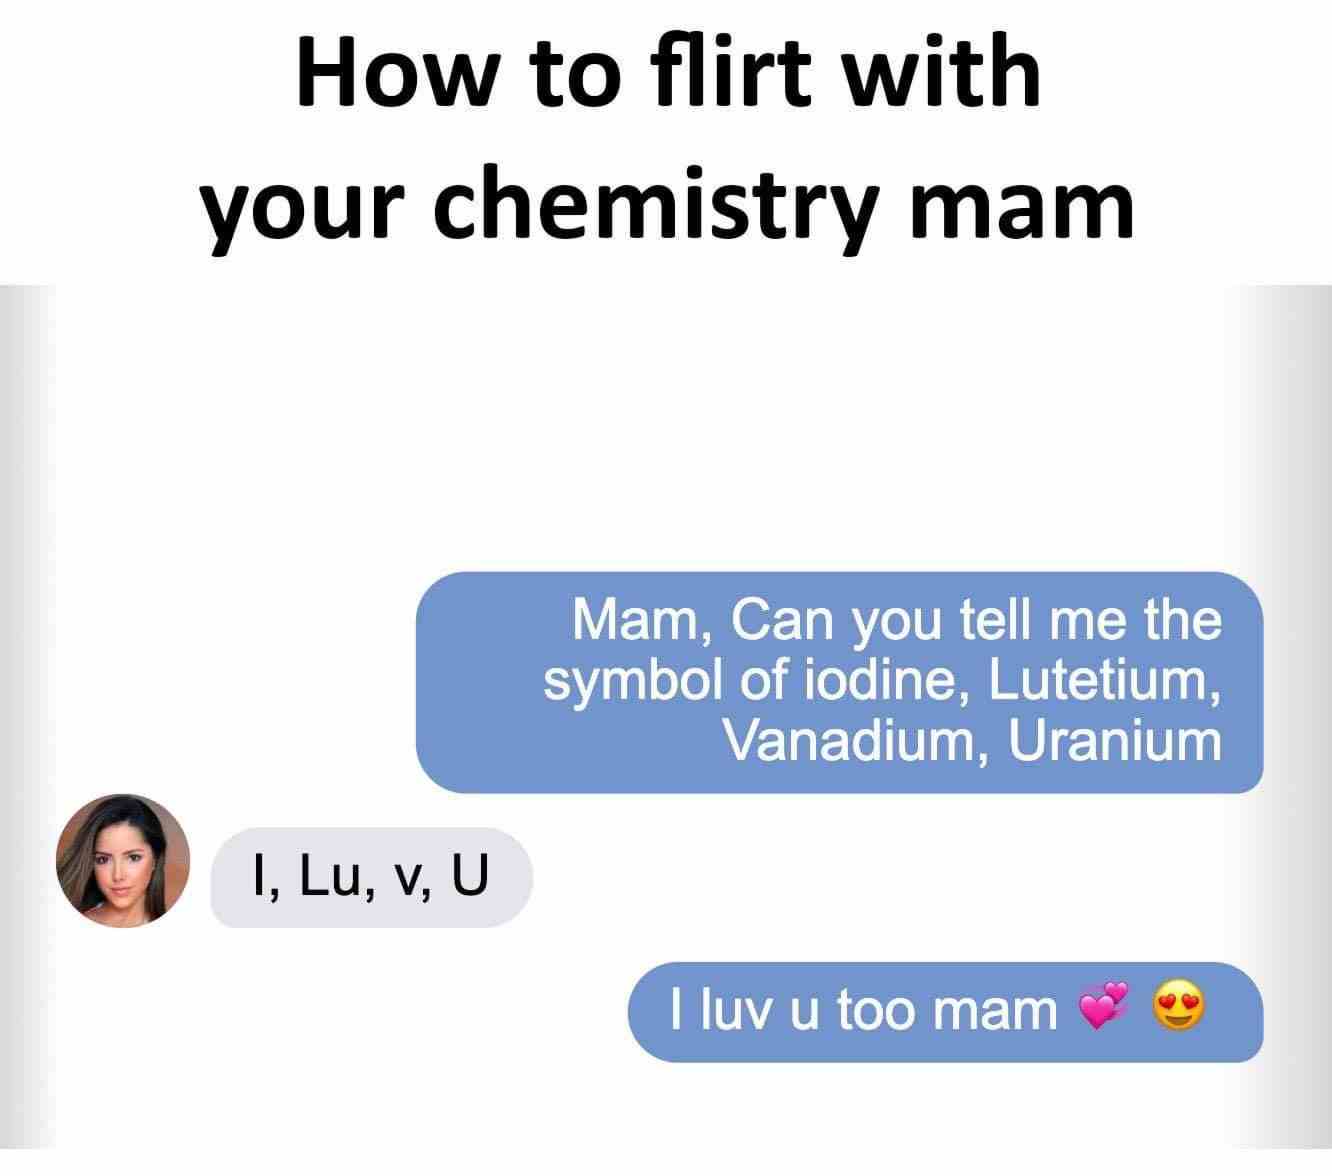 How to flirt with your chemistry mam